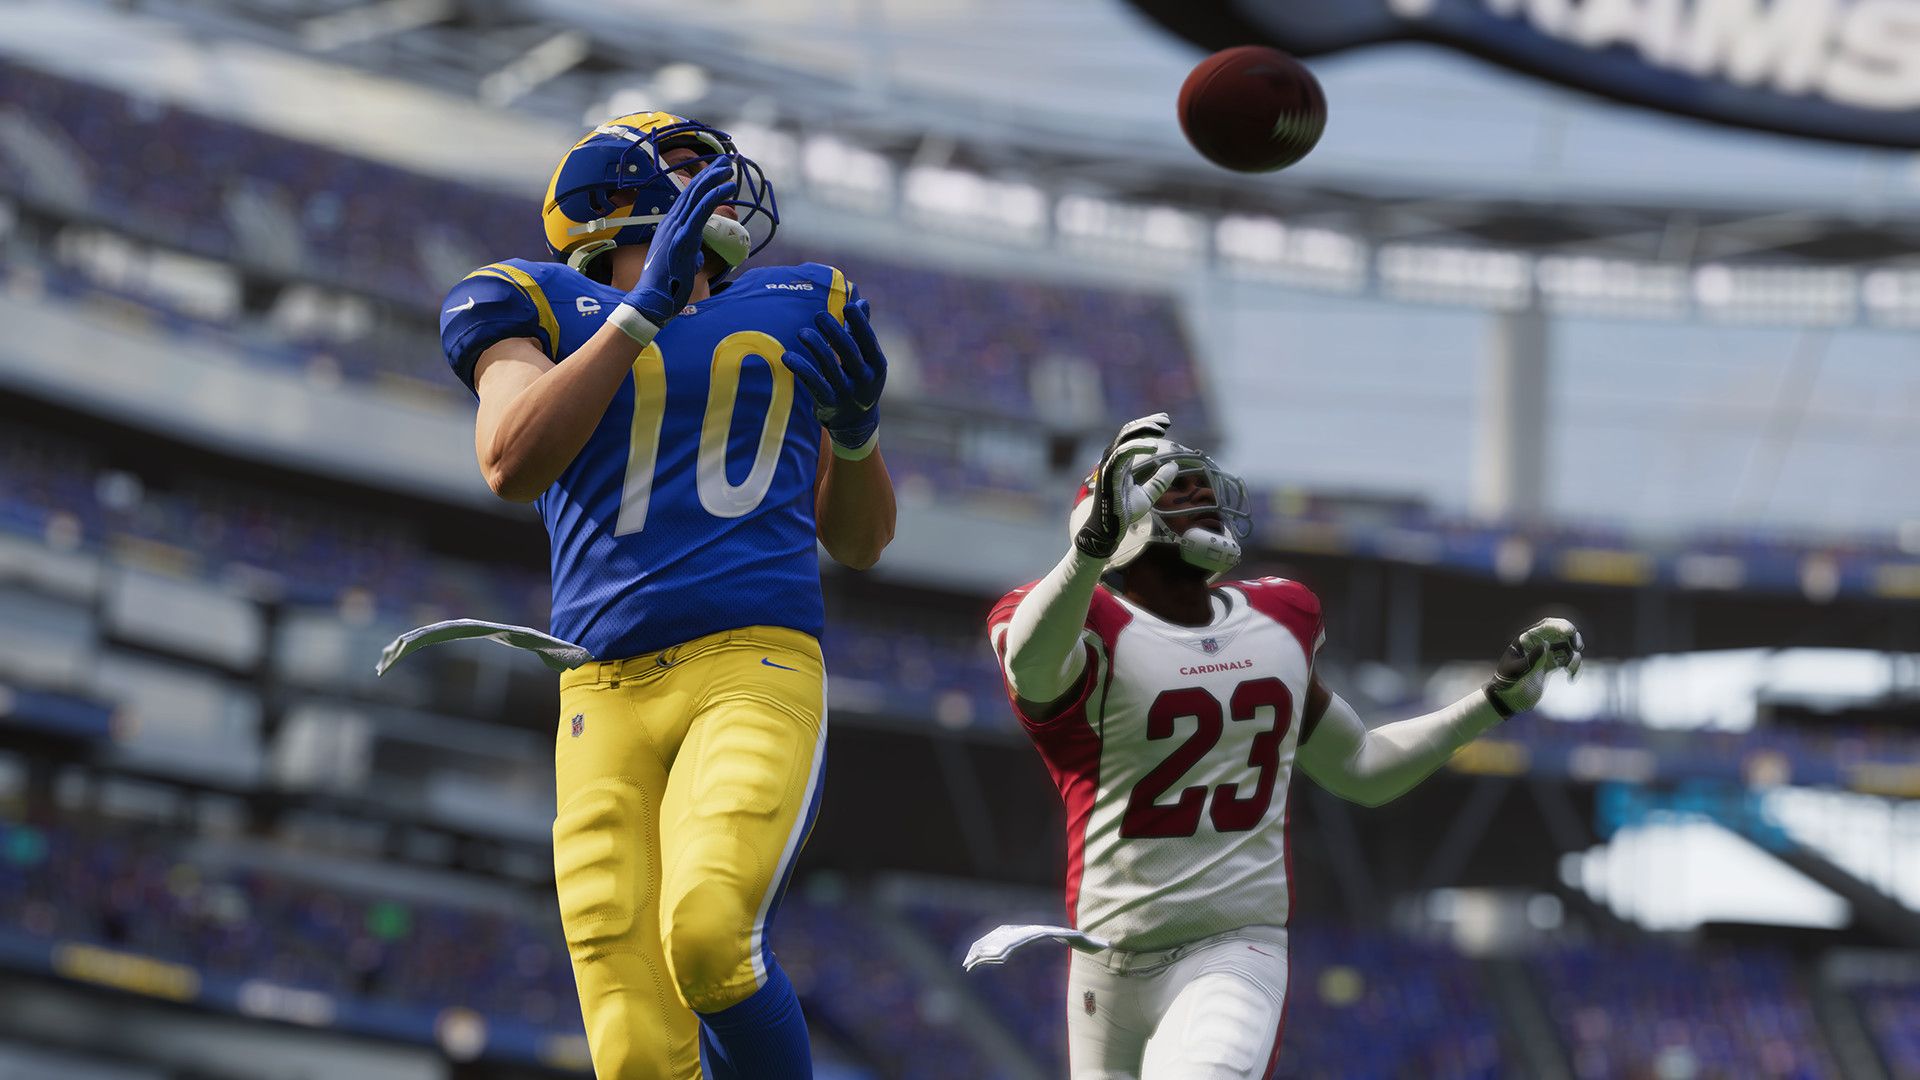 In this article, we are going to be going over how to get Madden 23 early access, so you can enjoy the popular American football game as early as possible.